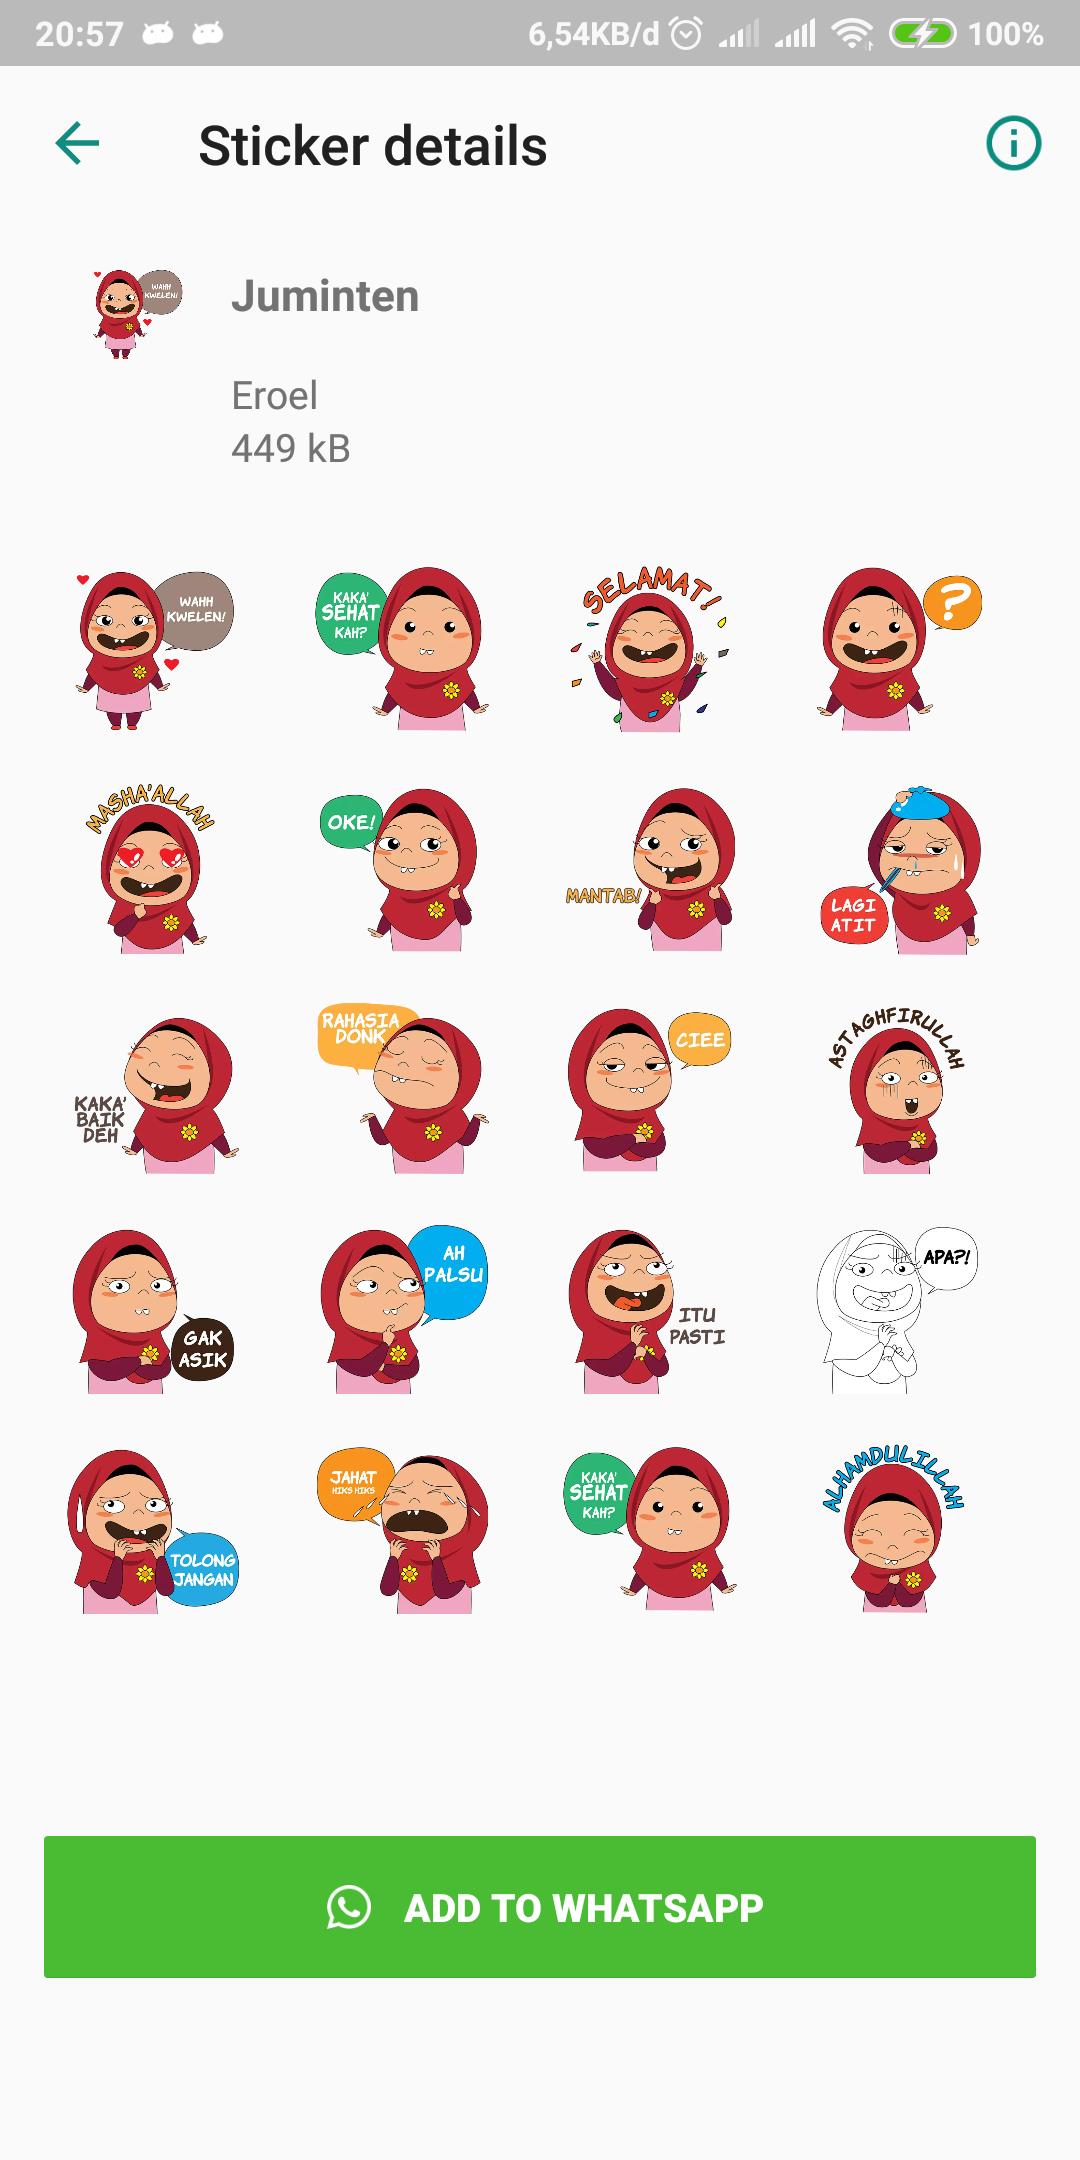  Stiker  Kartun Whatsapp  for Android APK  Download